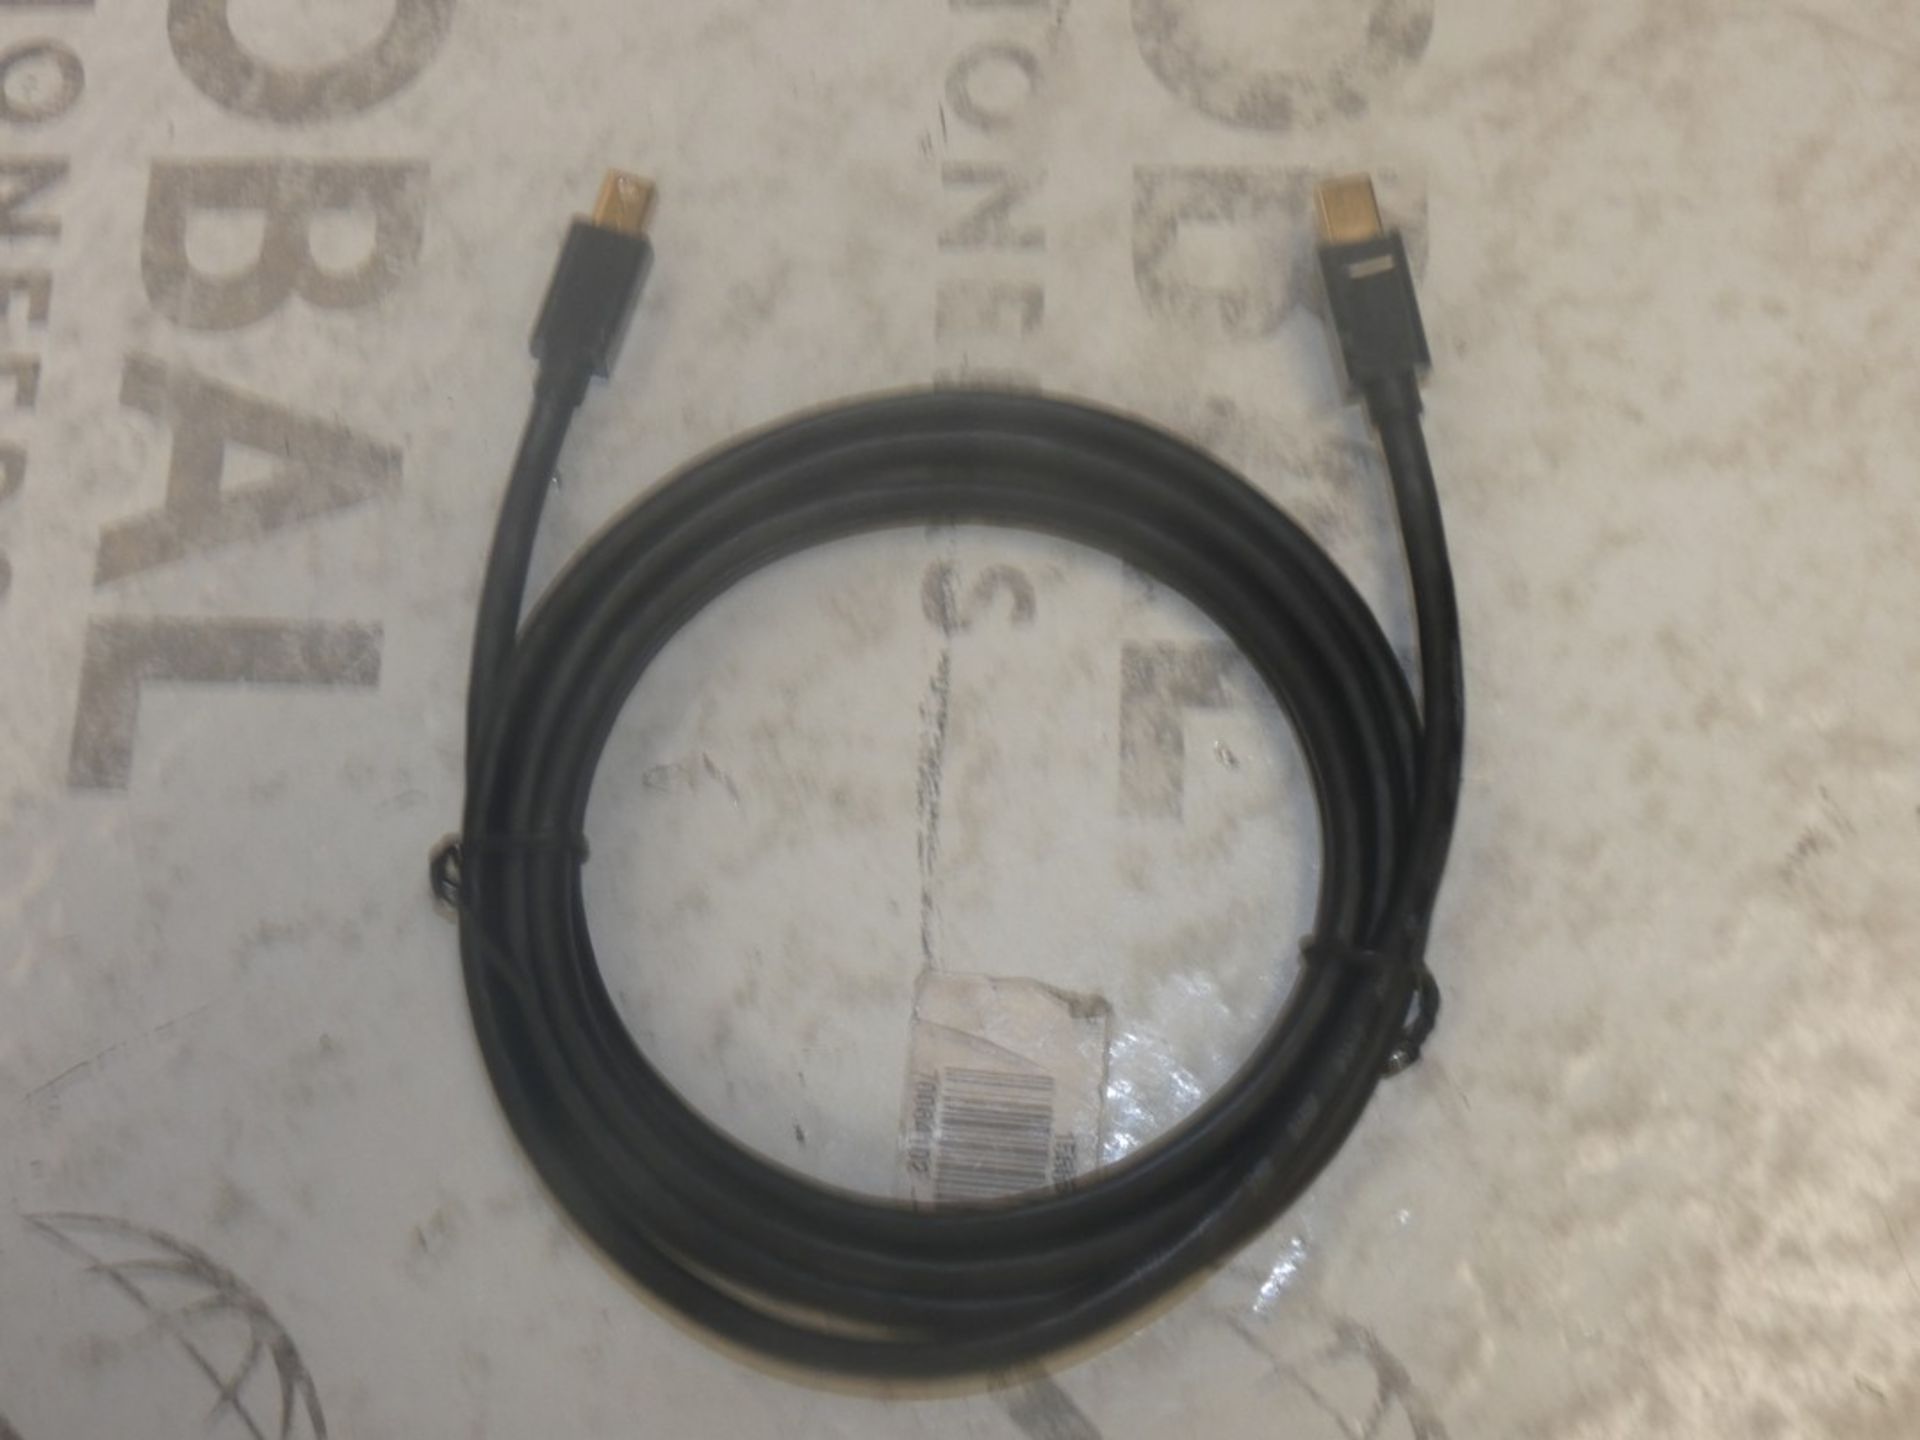 Lot to Contain 10 Brand New Display Port Cables (Viewing or Appraisals Highly Recommended)